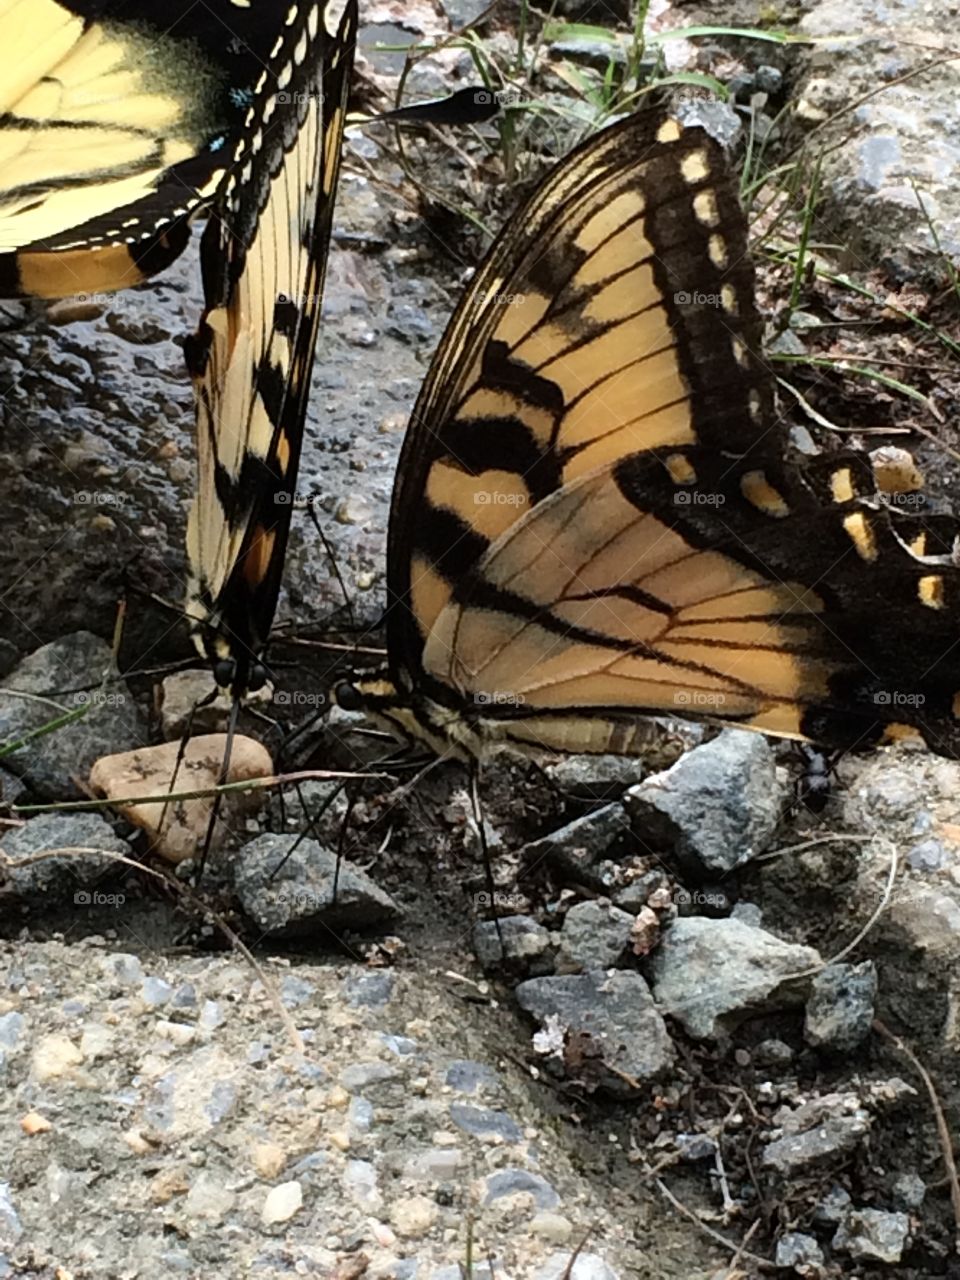 Butterflies . Hiking along a river and found these amazing butterflies gathering. 